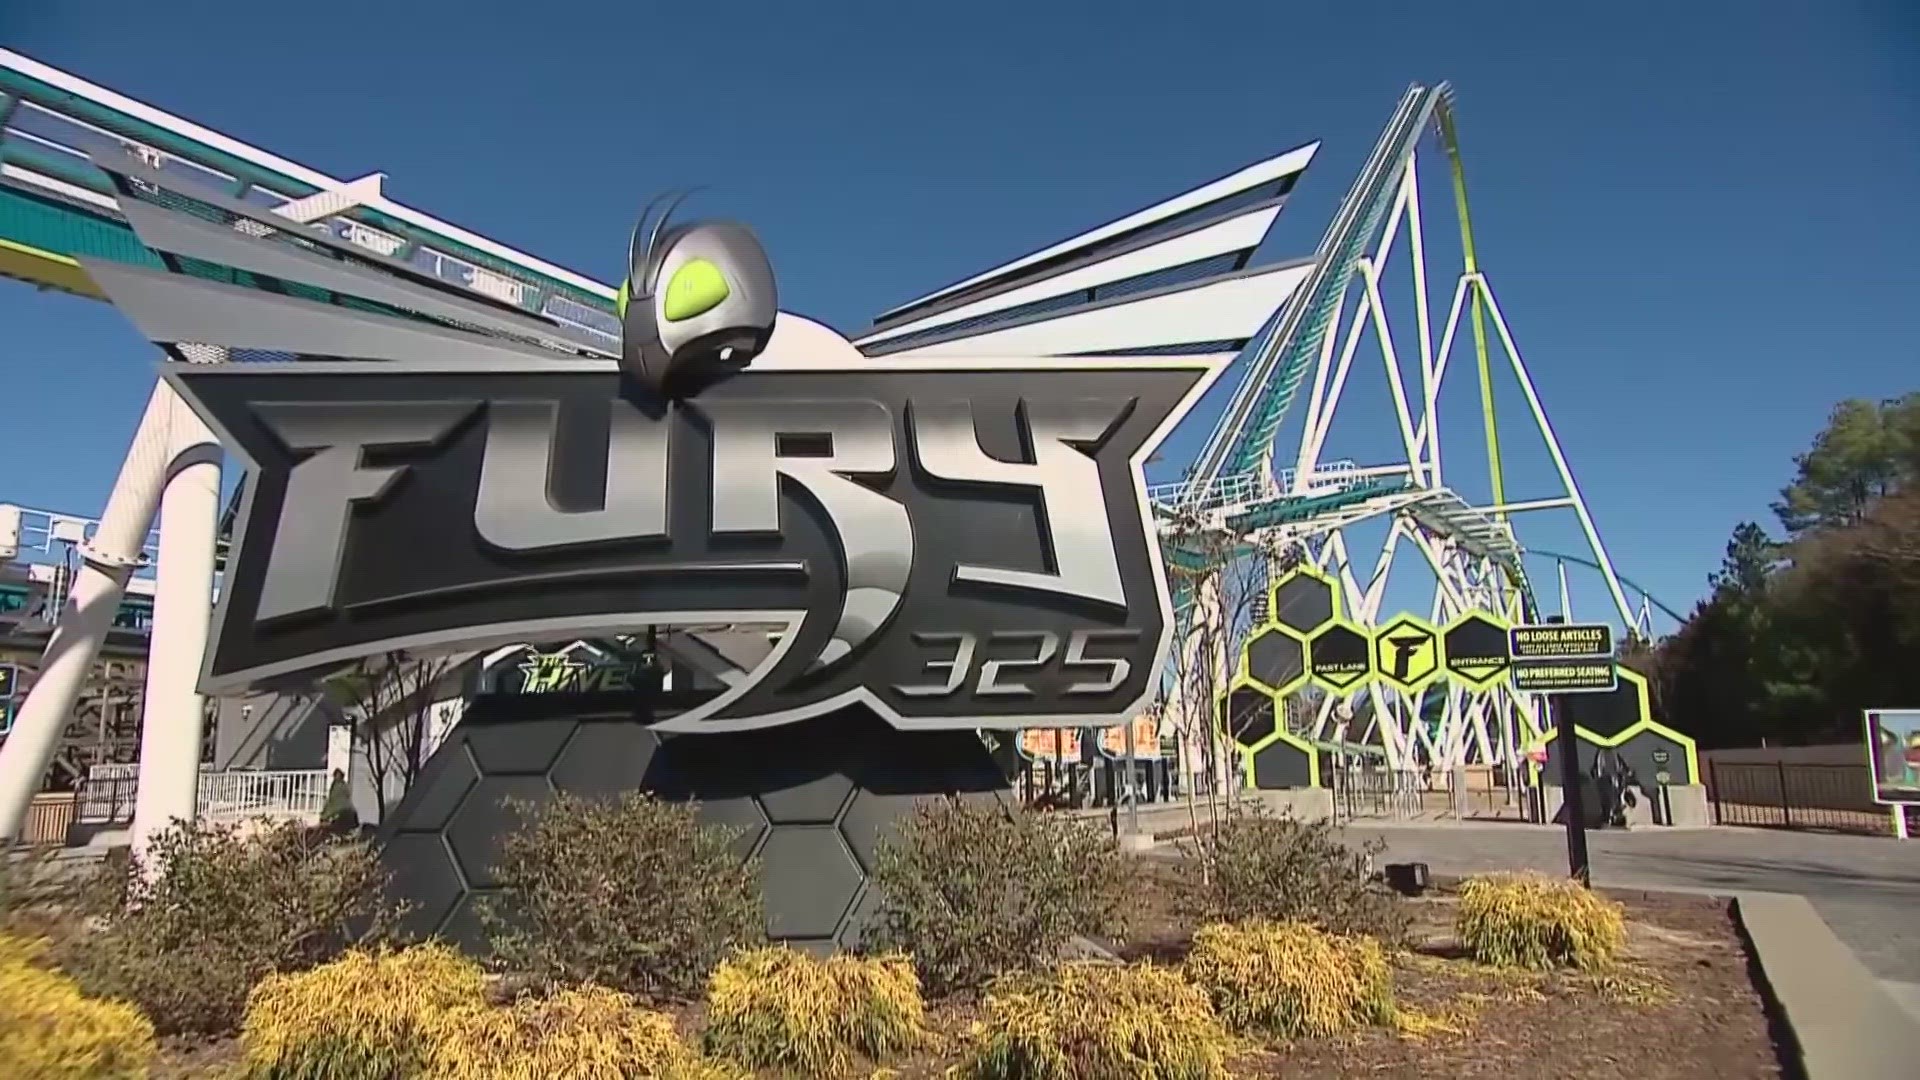 Fury 325 has been closed ever since a huge crack was found in one of the coaster's support beams. Here's how Carowinds plans to fix it.